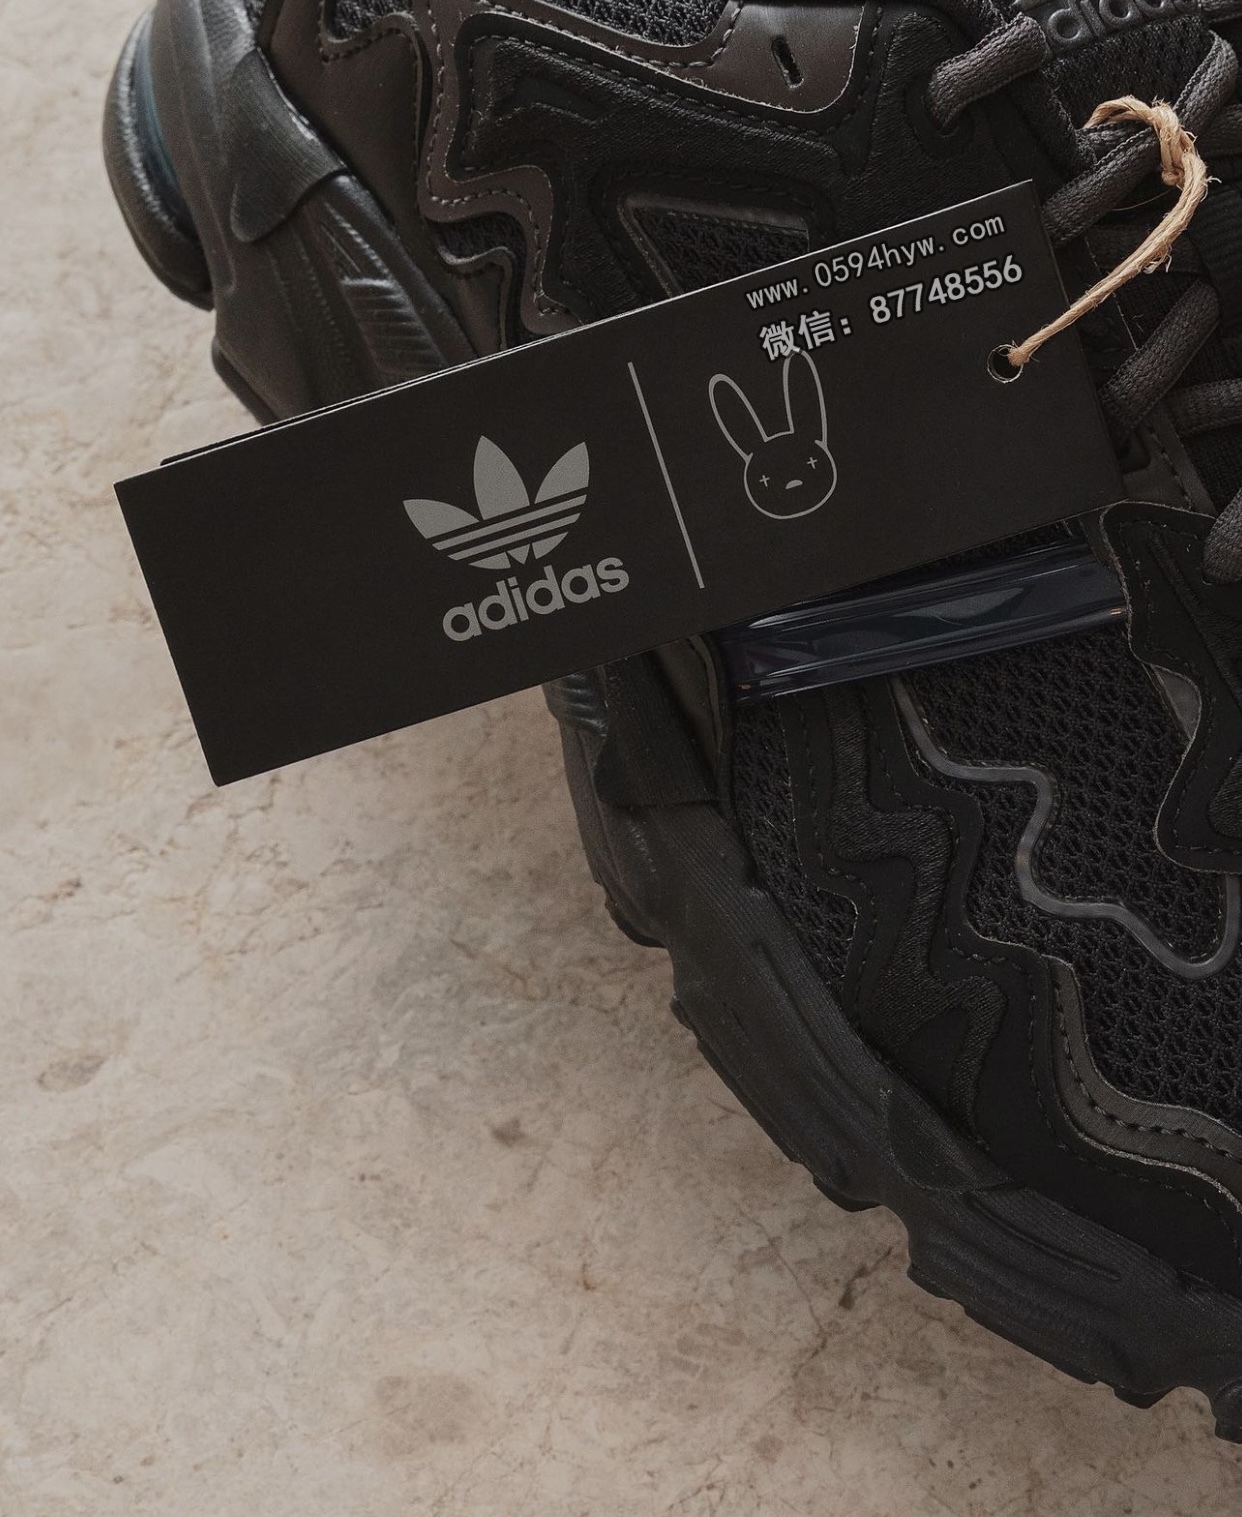 Bad-Bunny-adidas-Response-CL-Black-ID0805-Release-Date-8-1